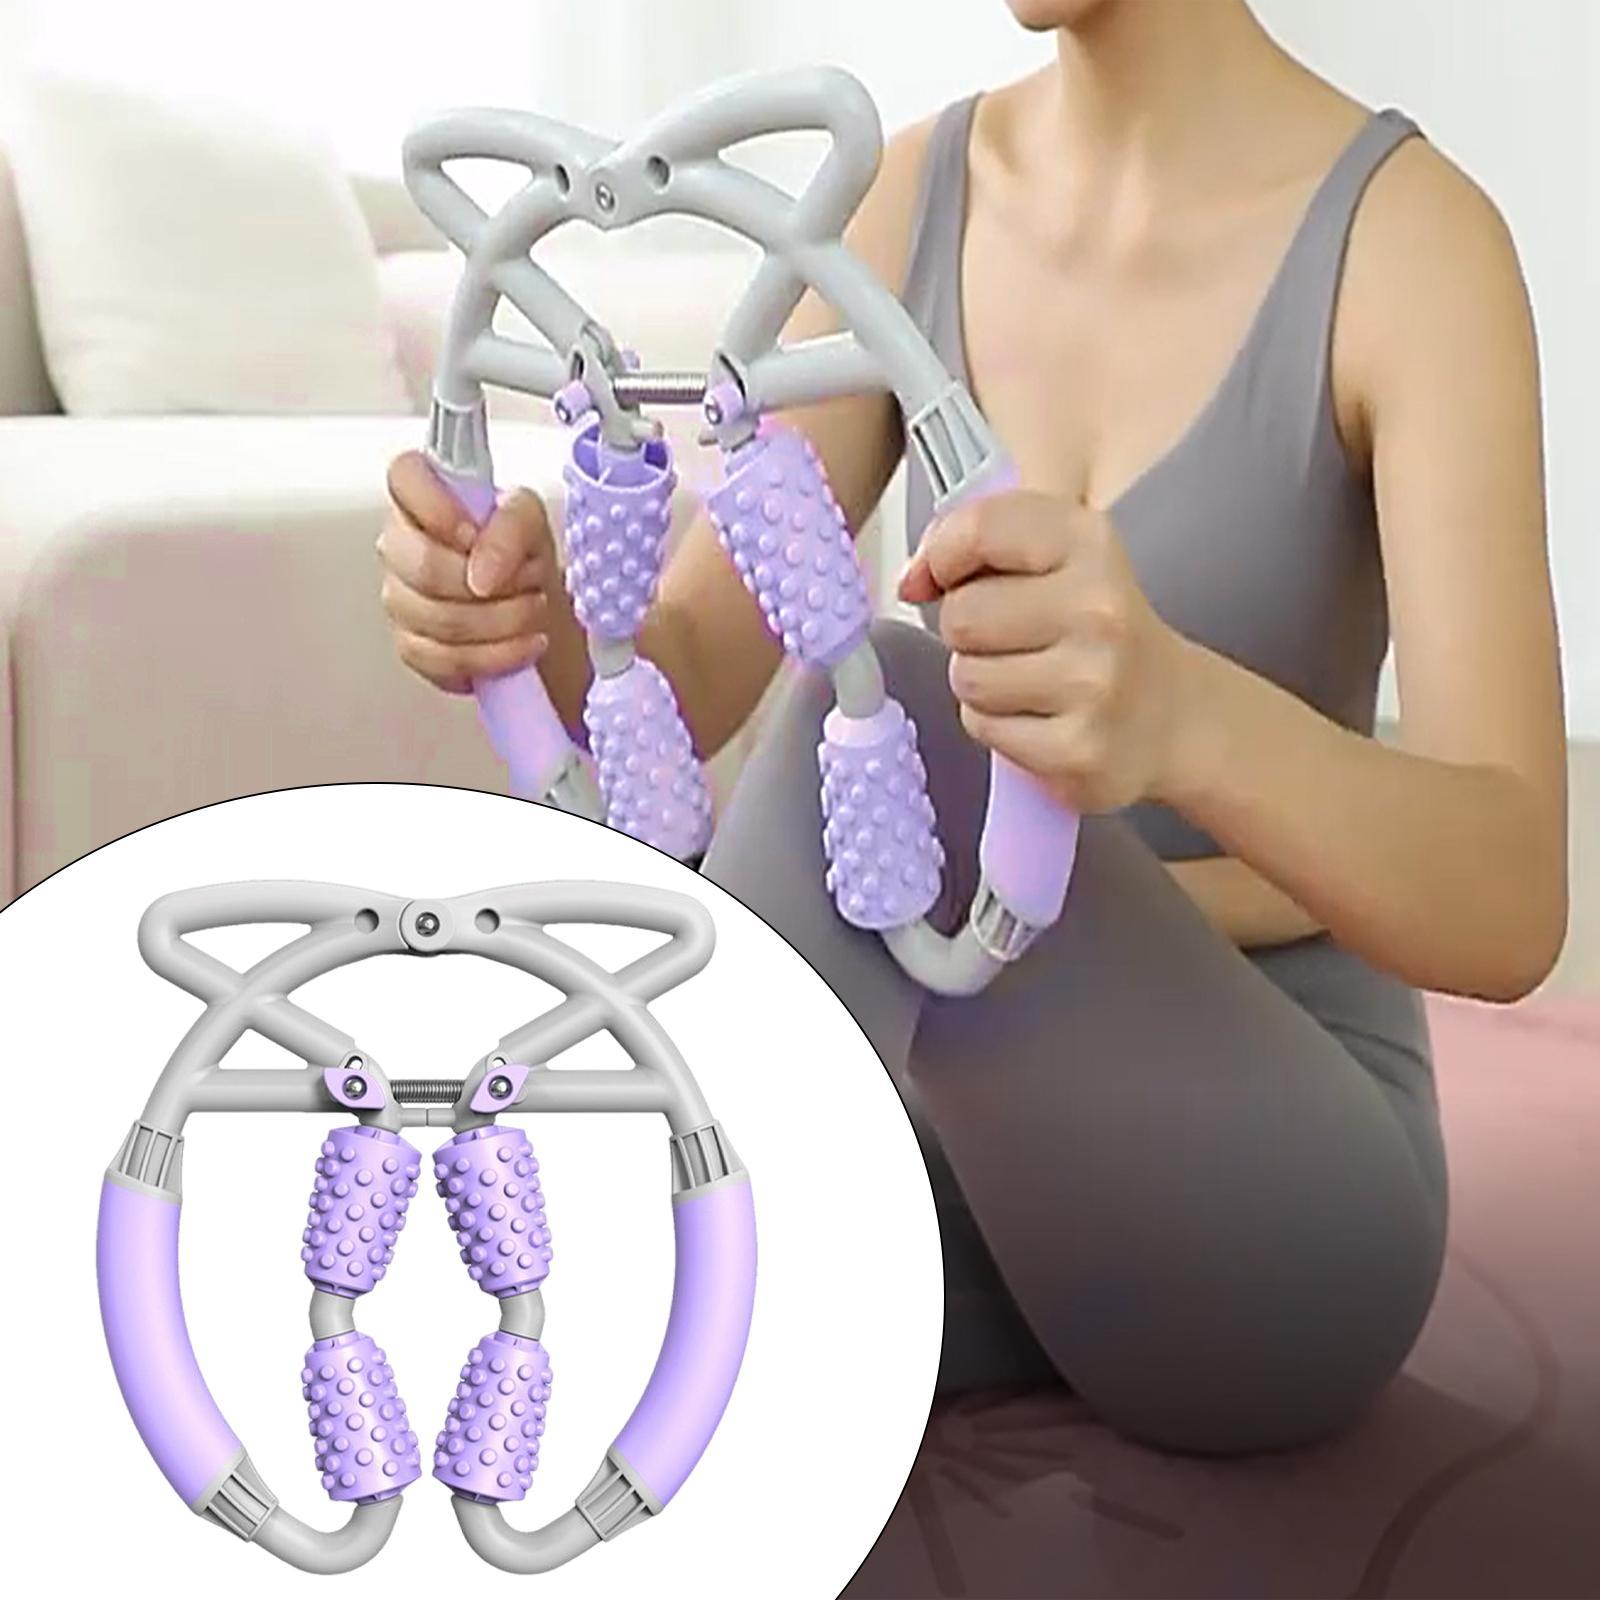 Massage Roller Yoga Fitness Massage Tool Muscle Relaxer for Neck Thigh Deep Tissue